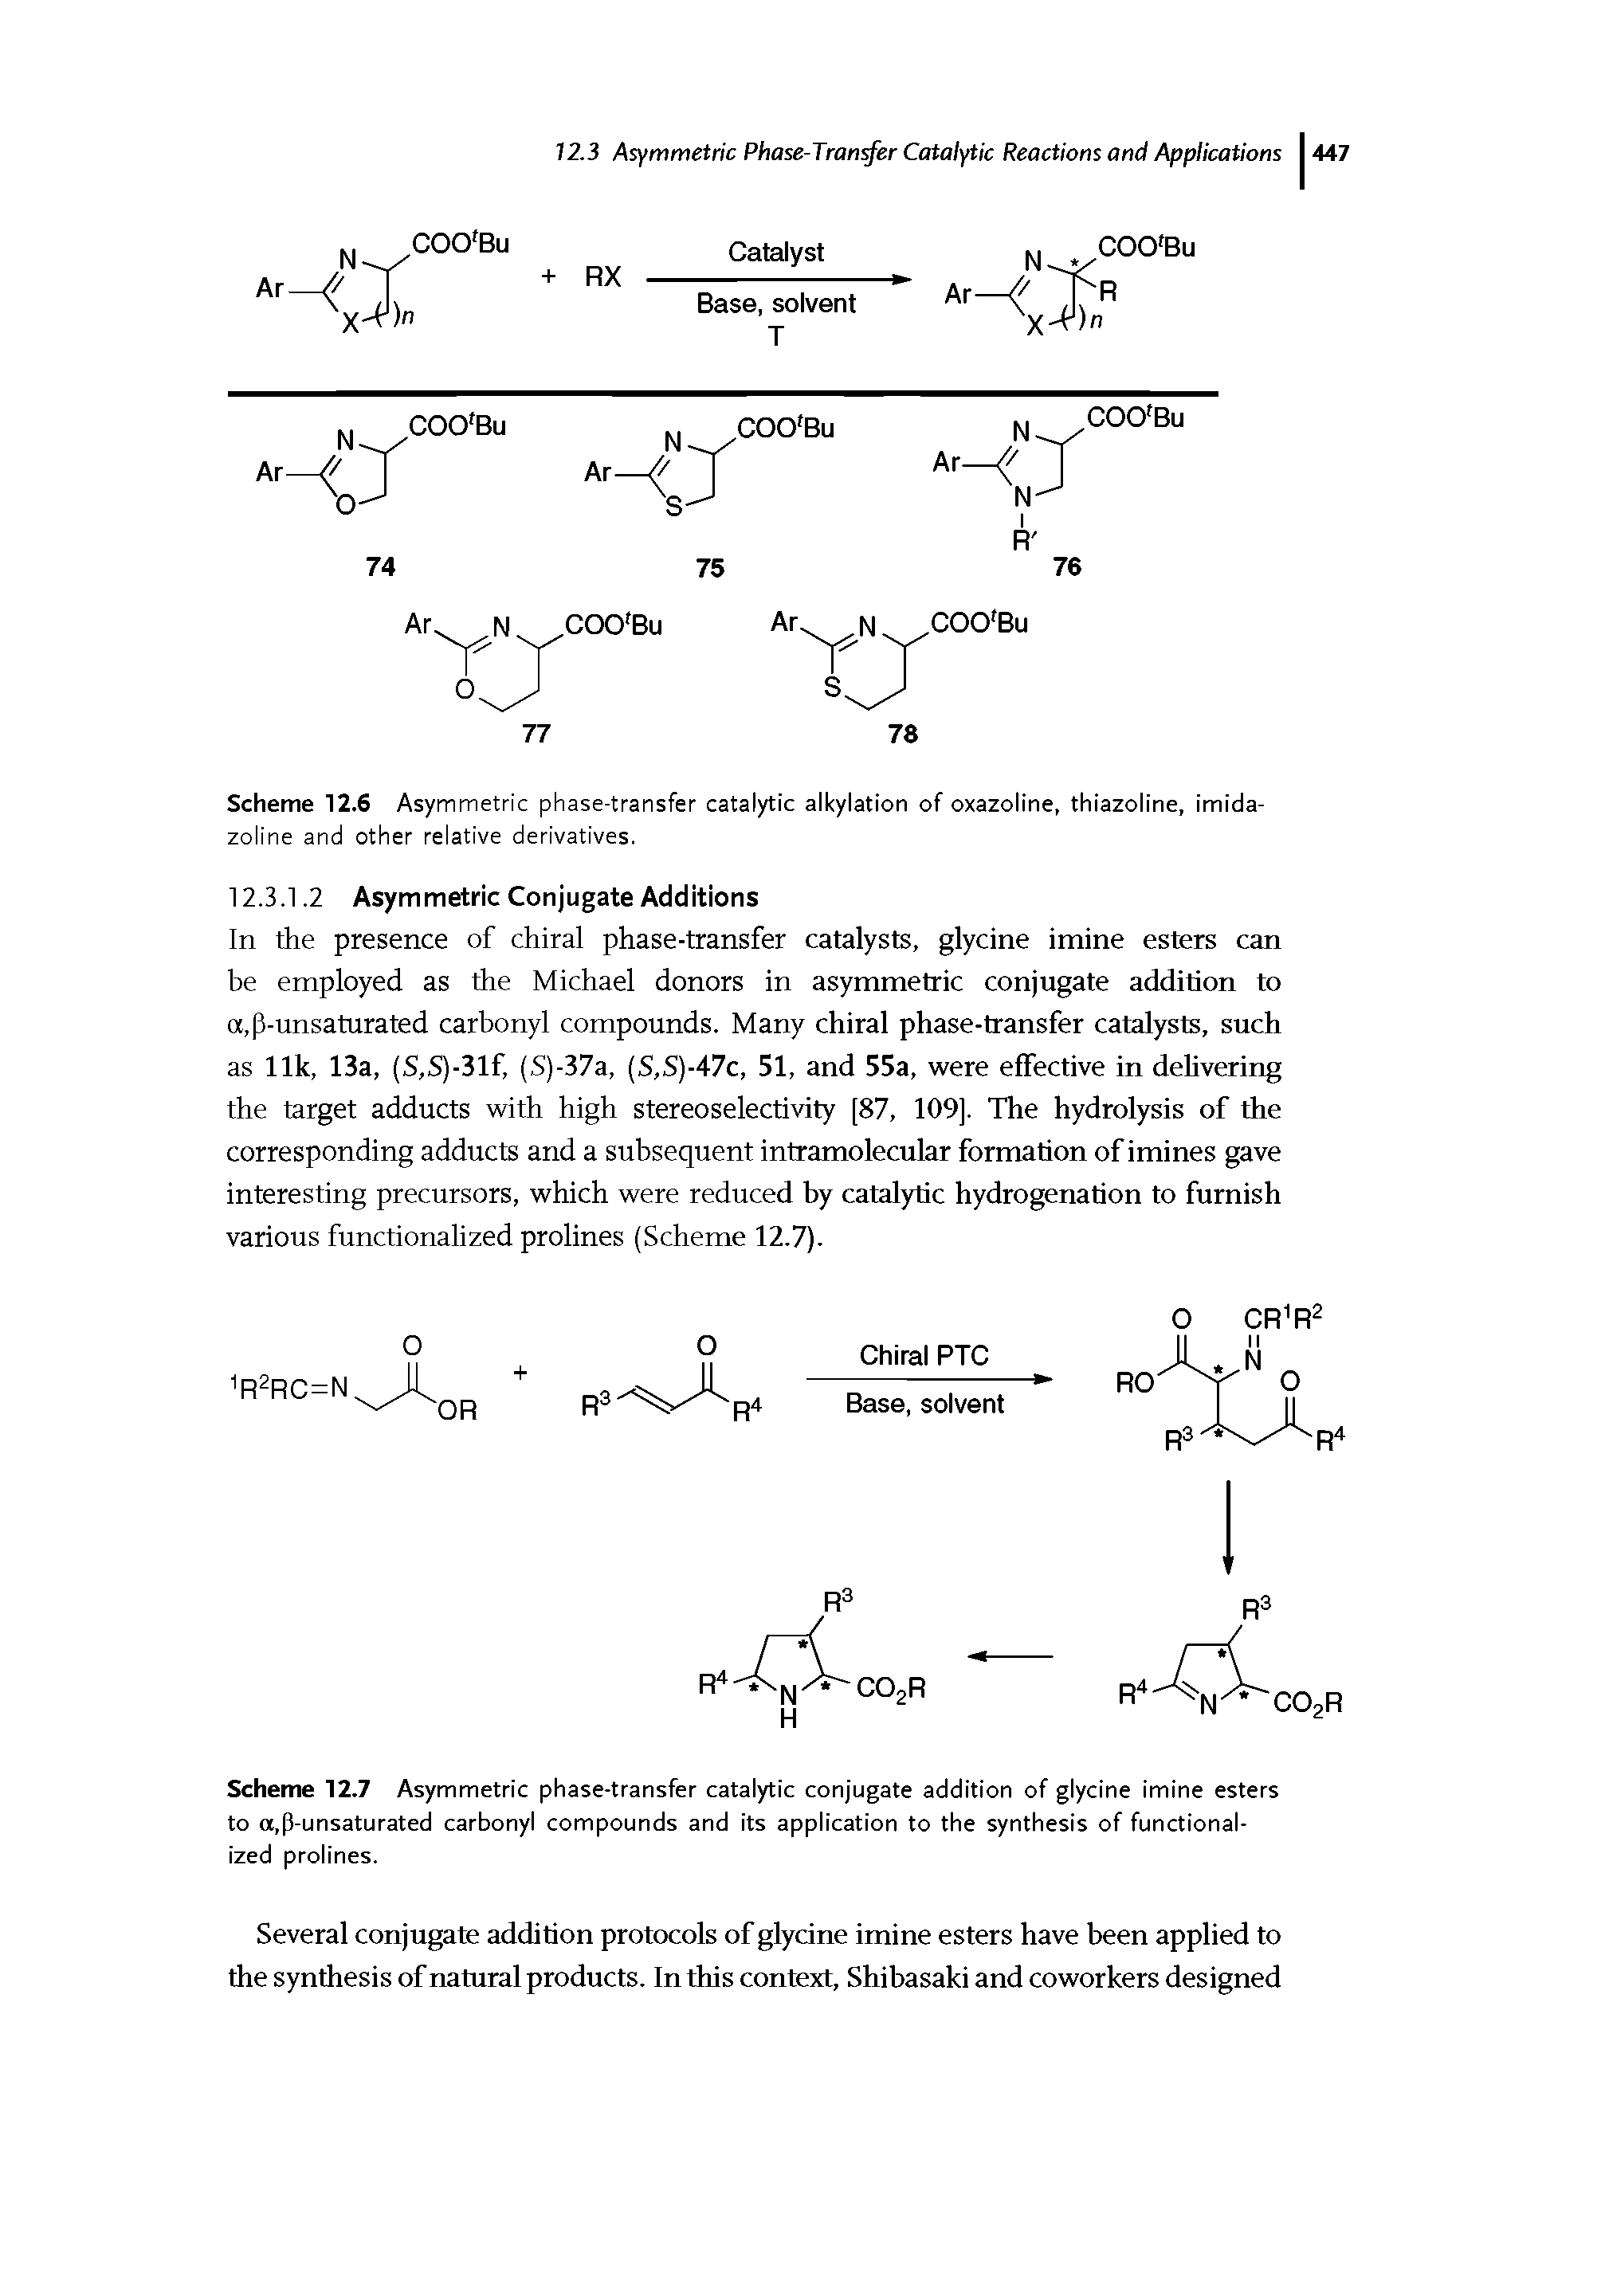 Scheme 12.7 Asymmetric phase-transfer catalytic conjugate addition of glycine imine esters to o, l-unsaturated carbonyl compounds and its application to the synthesis of functionalized prolines.